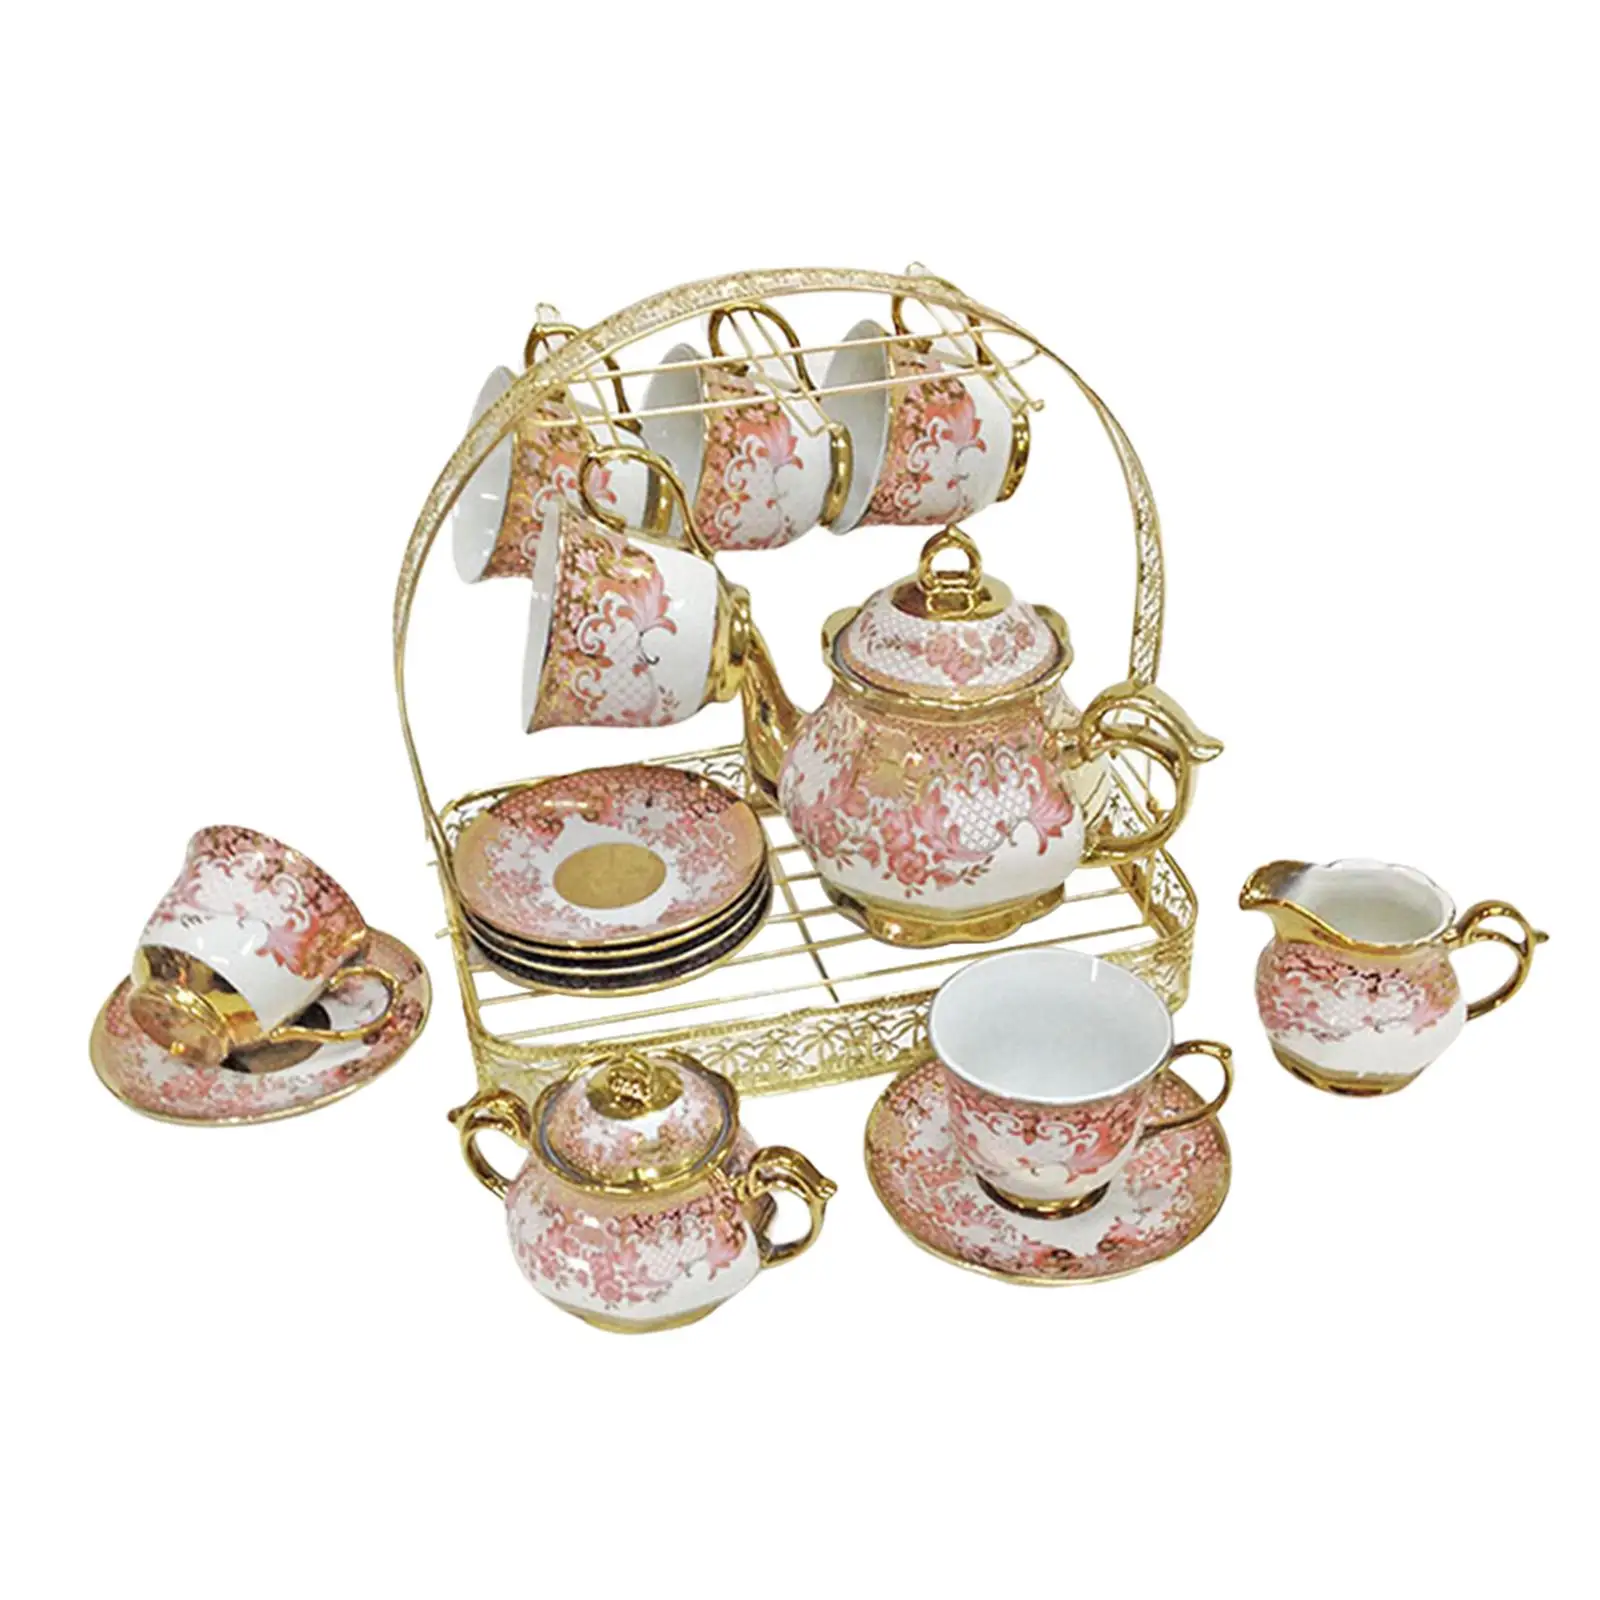 Ceramic Cups and Saucers Set Floral Tea Cups Coffee Pot Espresso Cup Porcelain Tea Cups Set for Dining Room Home Afternoon Tea